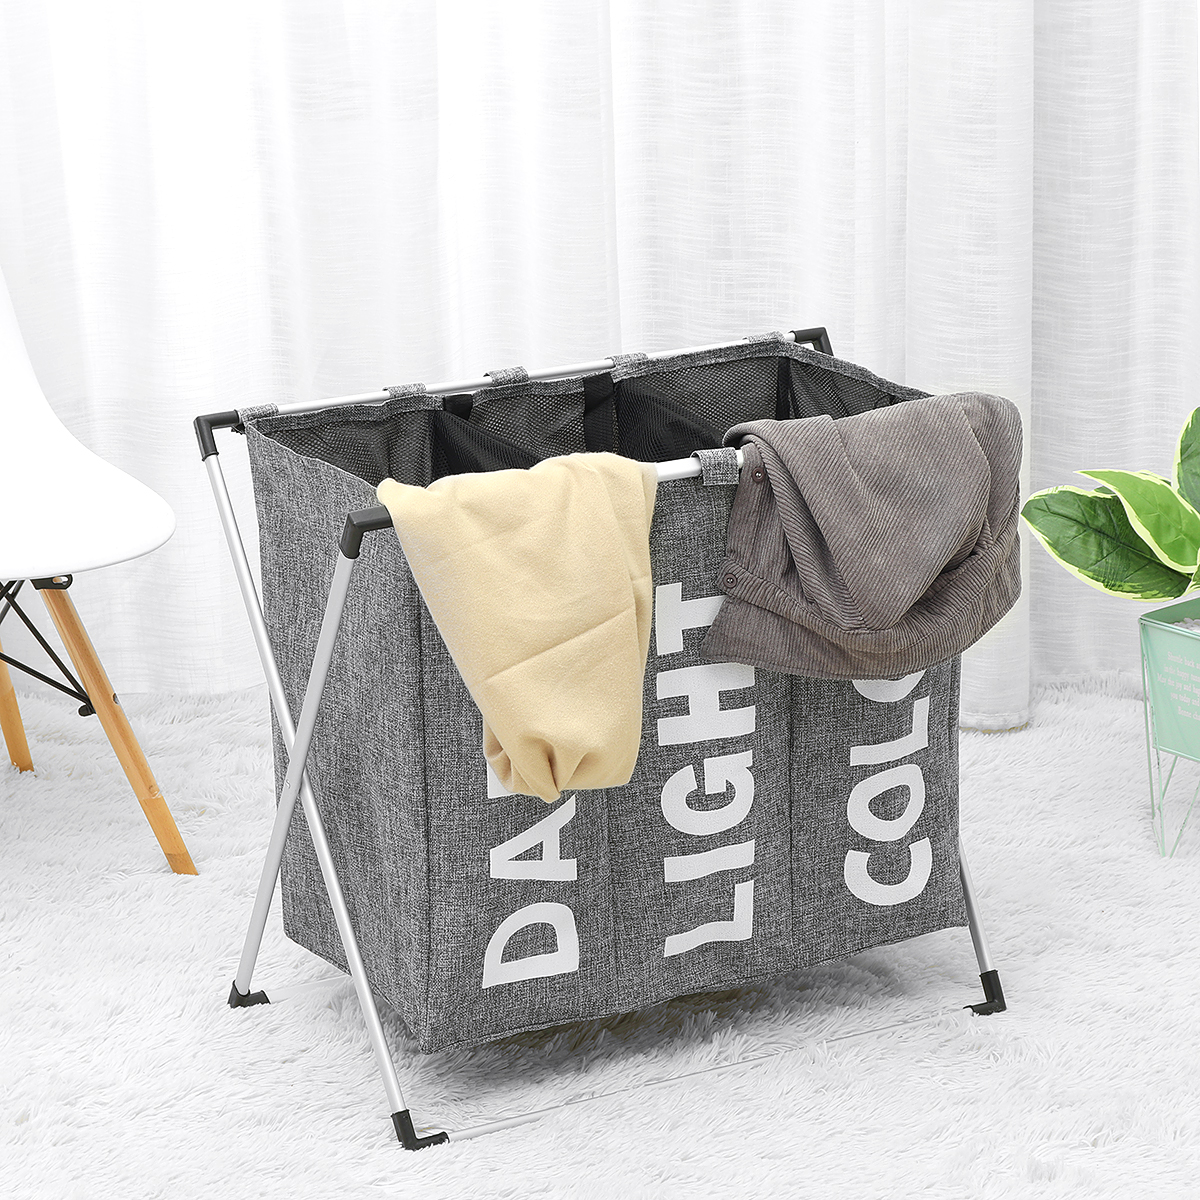 Foldable-Laundry-Basket-Folding-Dirty-Clothes-Bag-Washing-Bin-Home-Clothes-Organizer-with-Handle-1785430-13